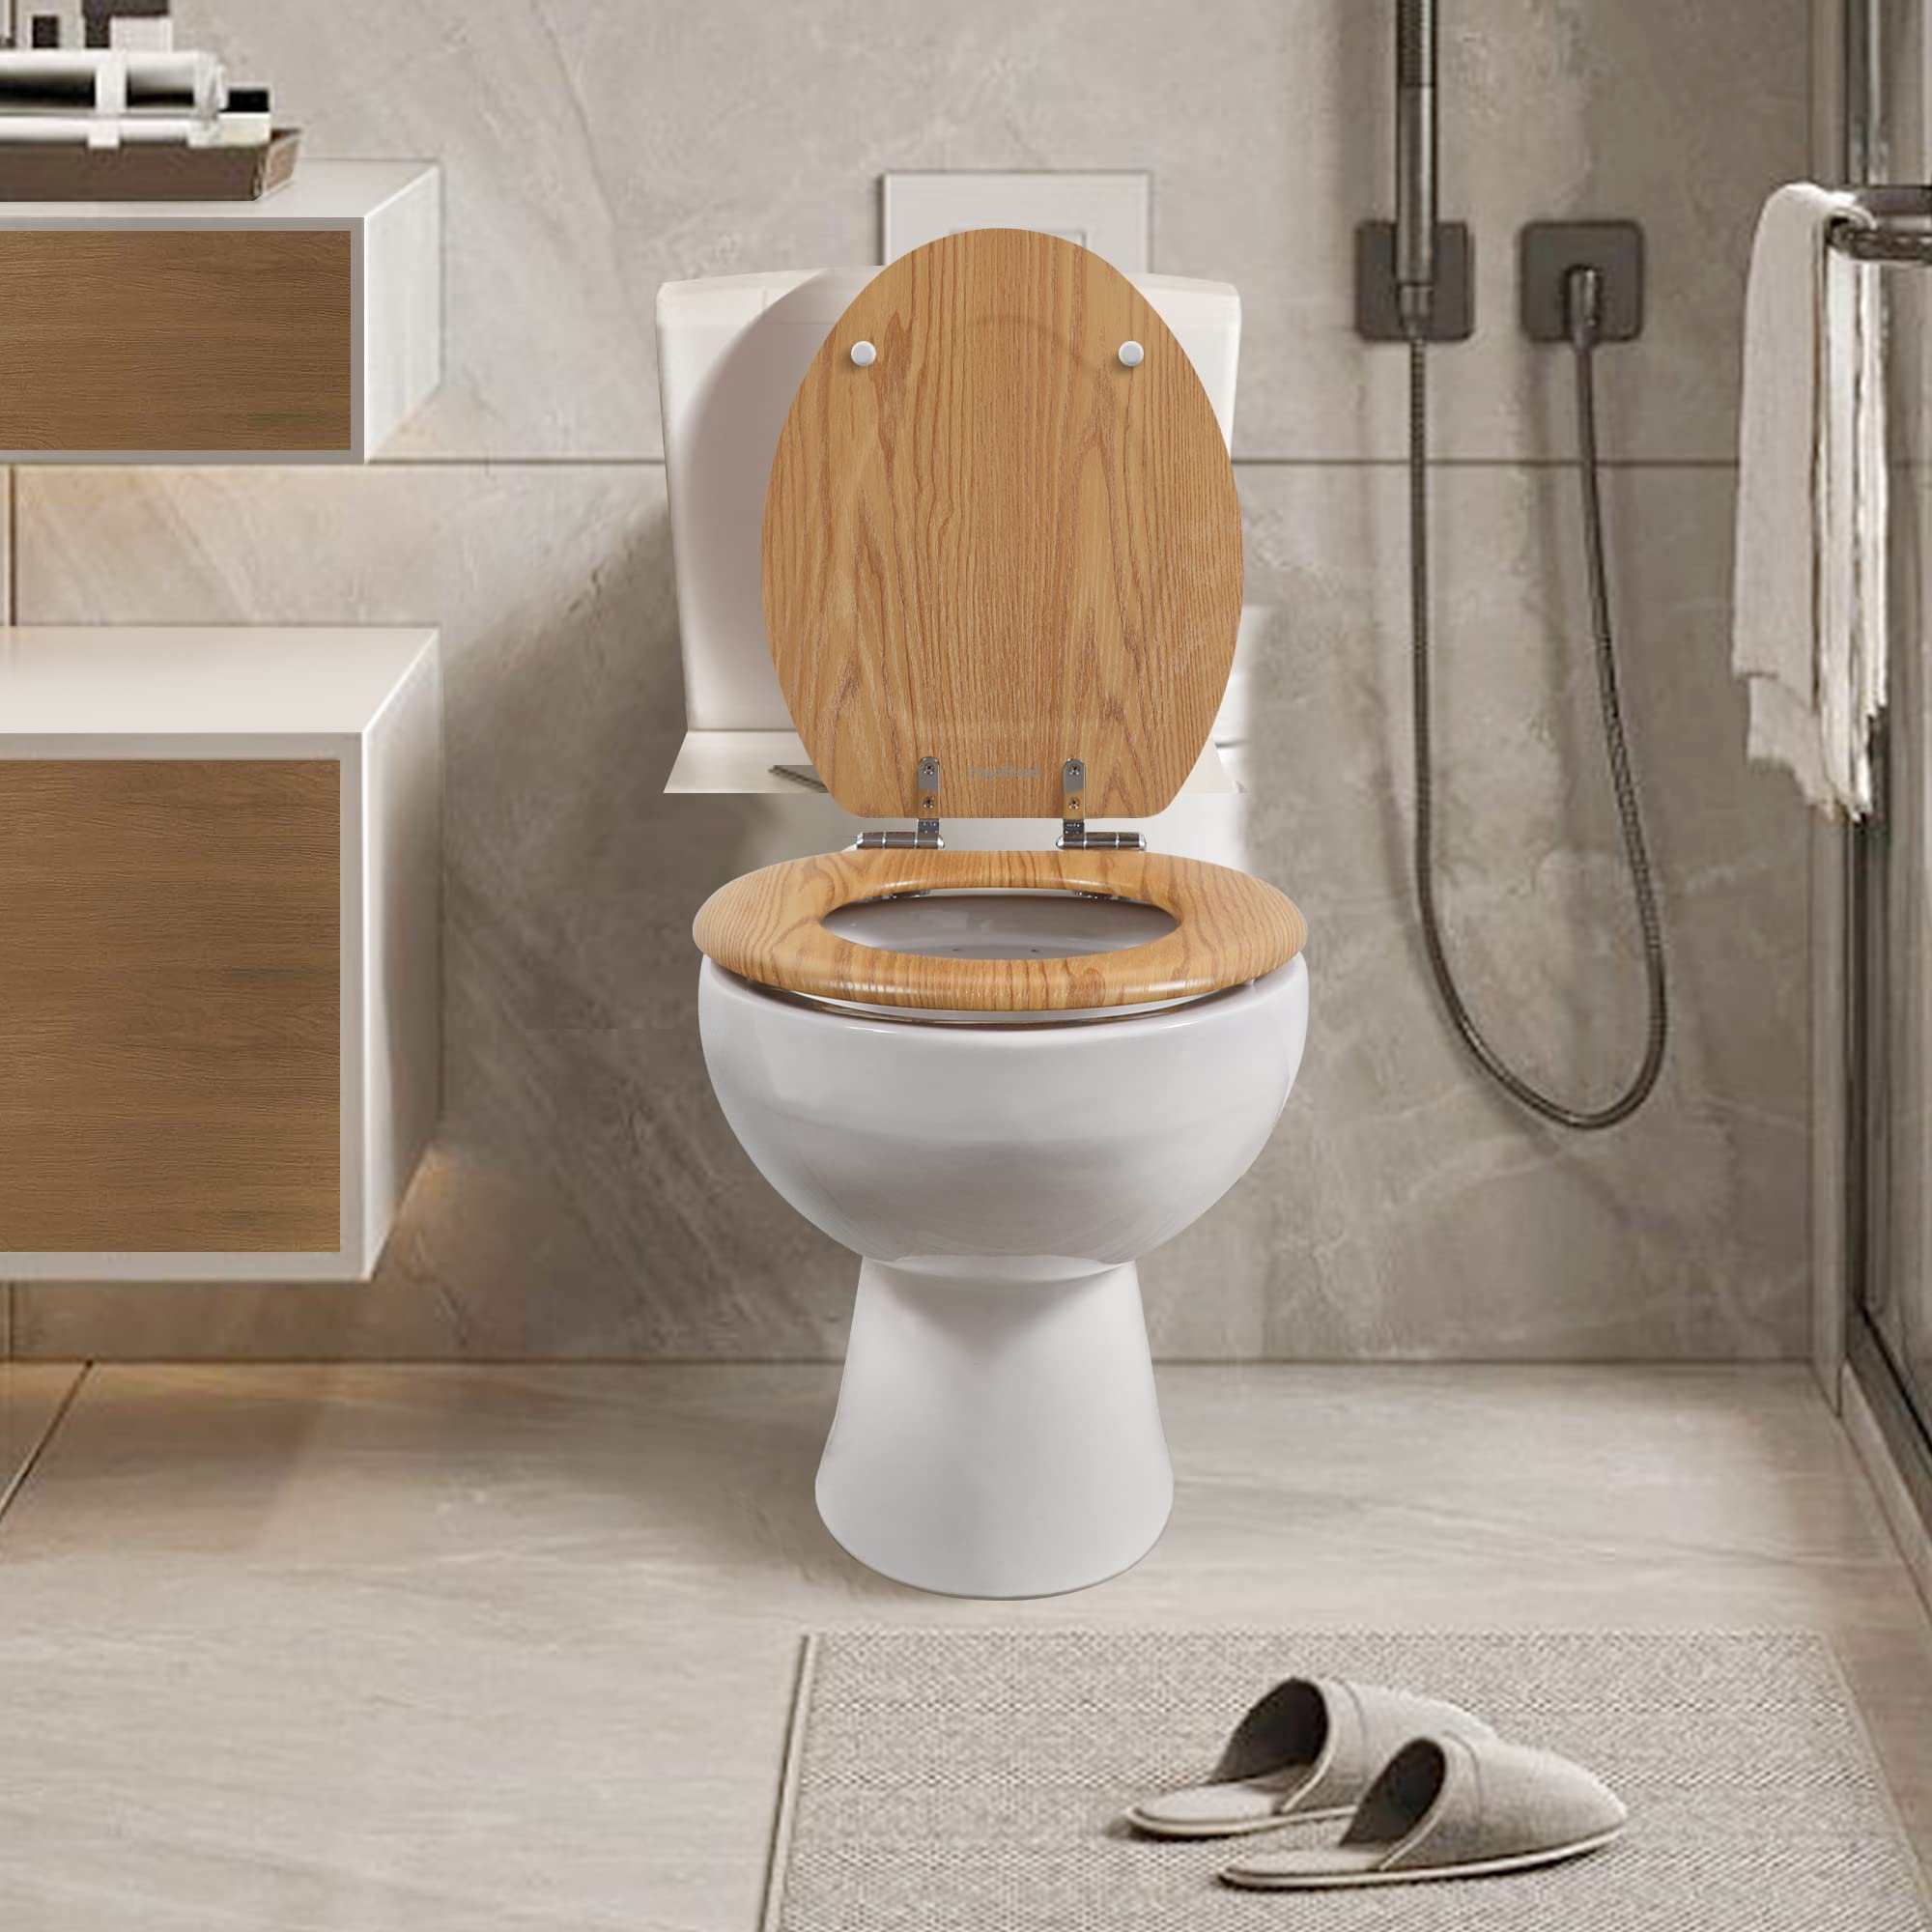 toilet seats for sale amazon New expensive shiny solid hardwood inlaid toilet seat